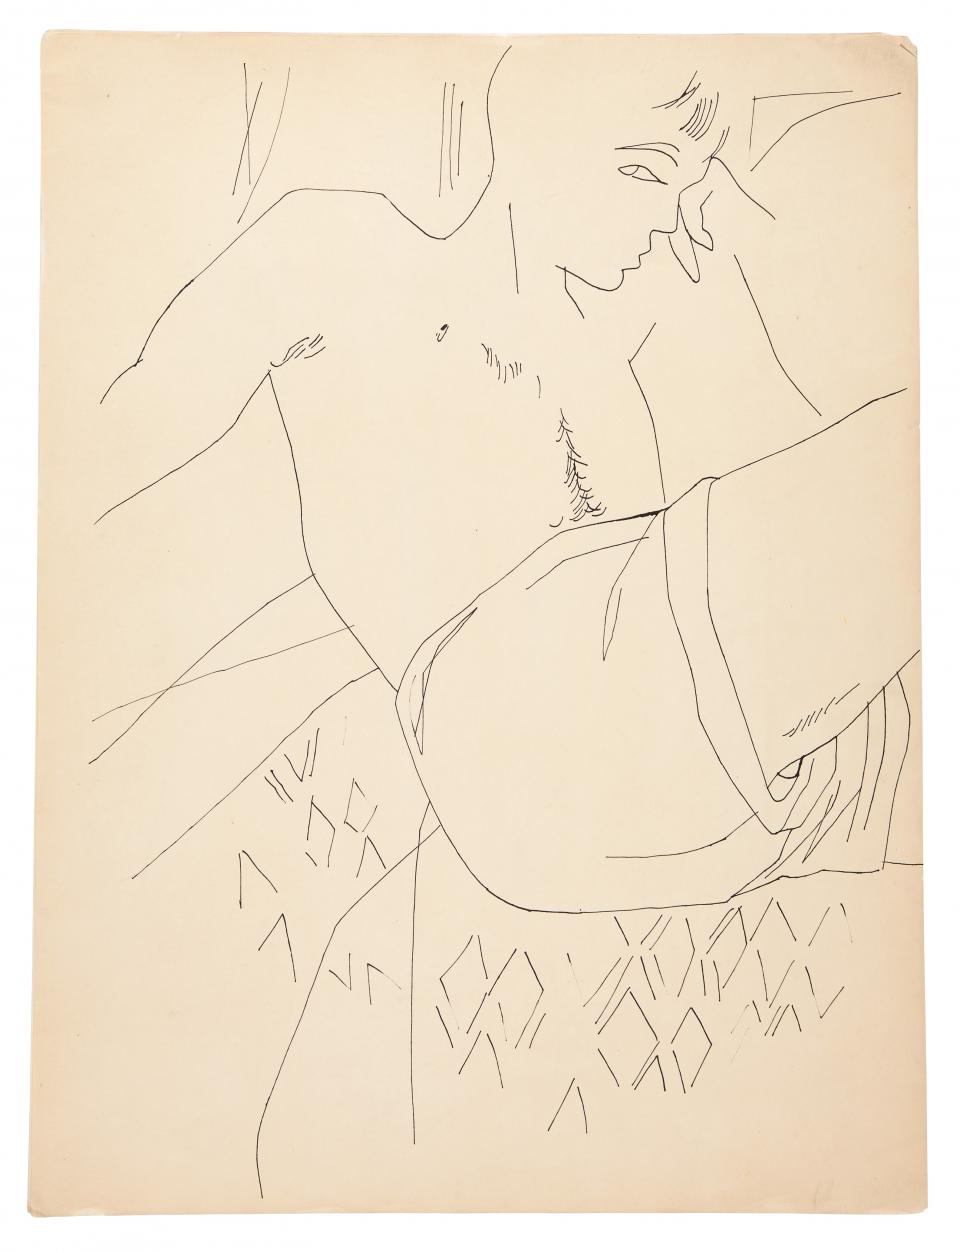 Andy Warhol "Male Partial Figure (verso)", 1954